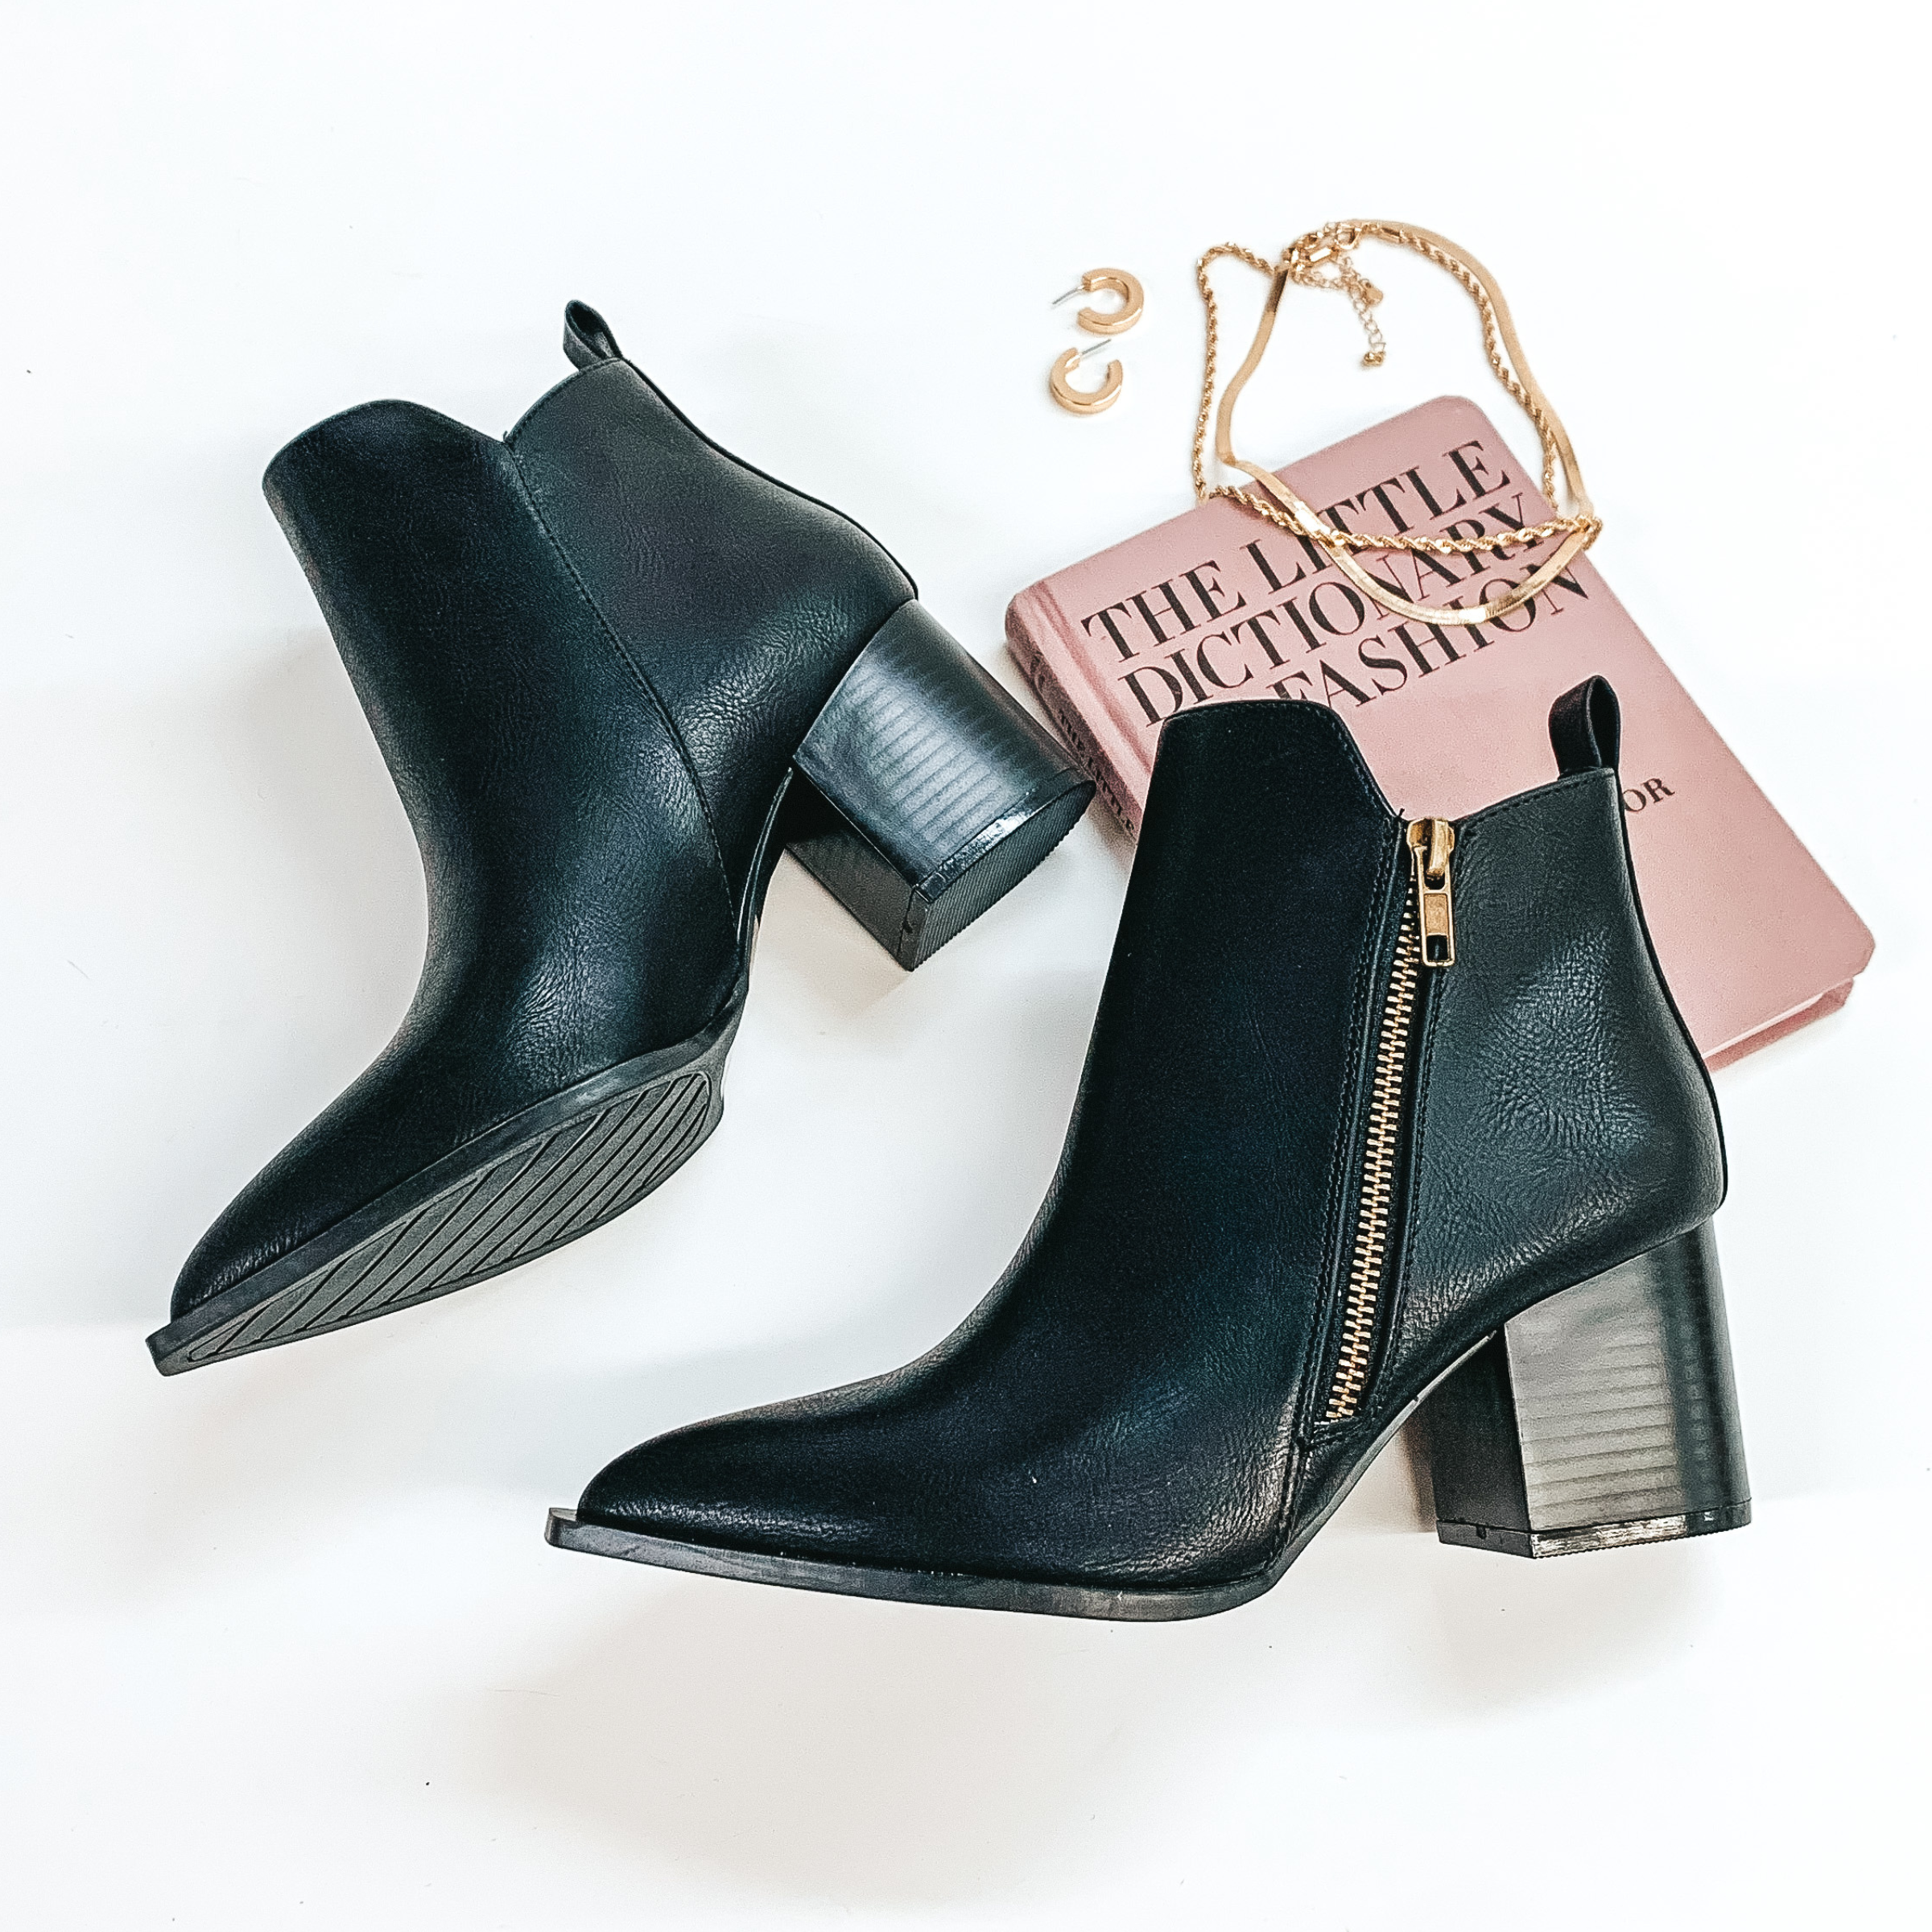 Ankle booties in black with a side zipper. These booties also have a wooden heel. These booties are pictured on a white background with gold jewelry and a book.  